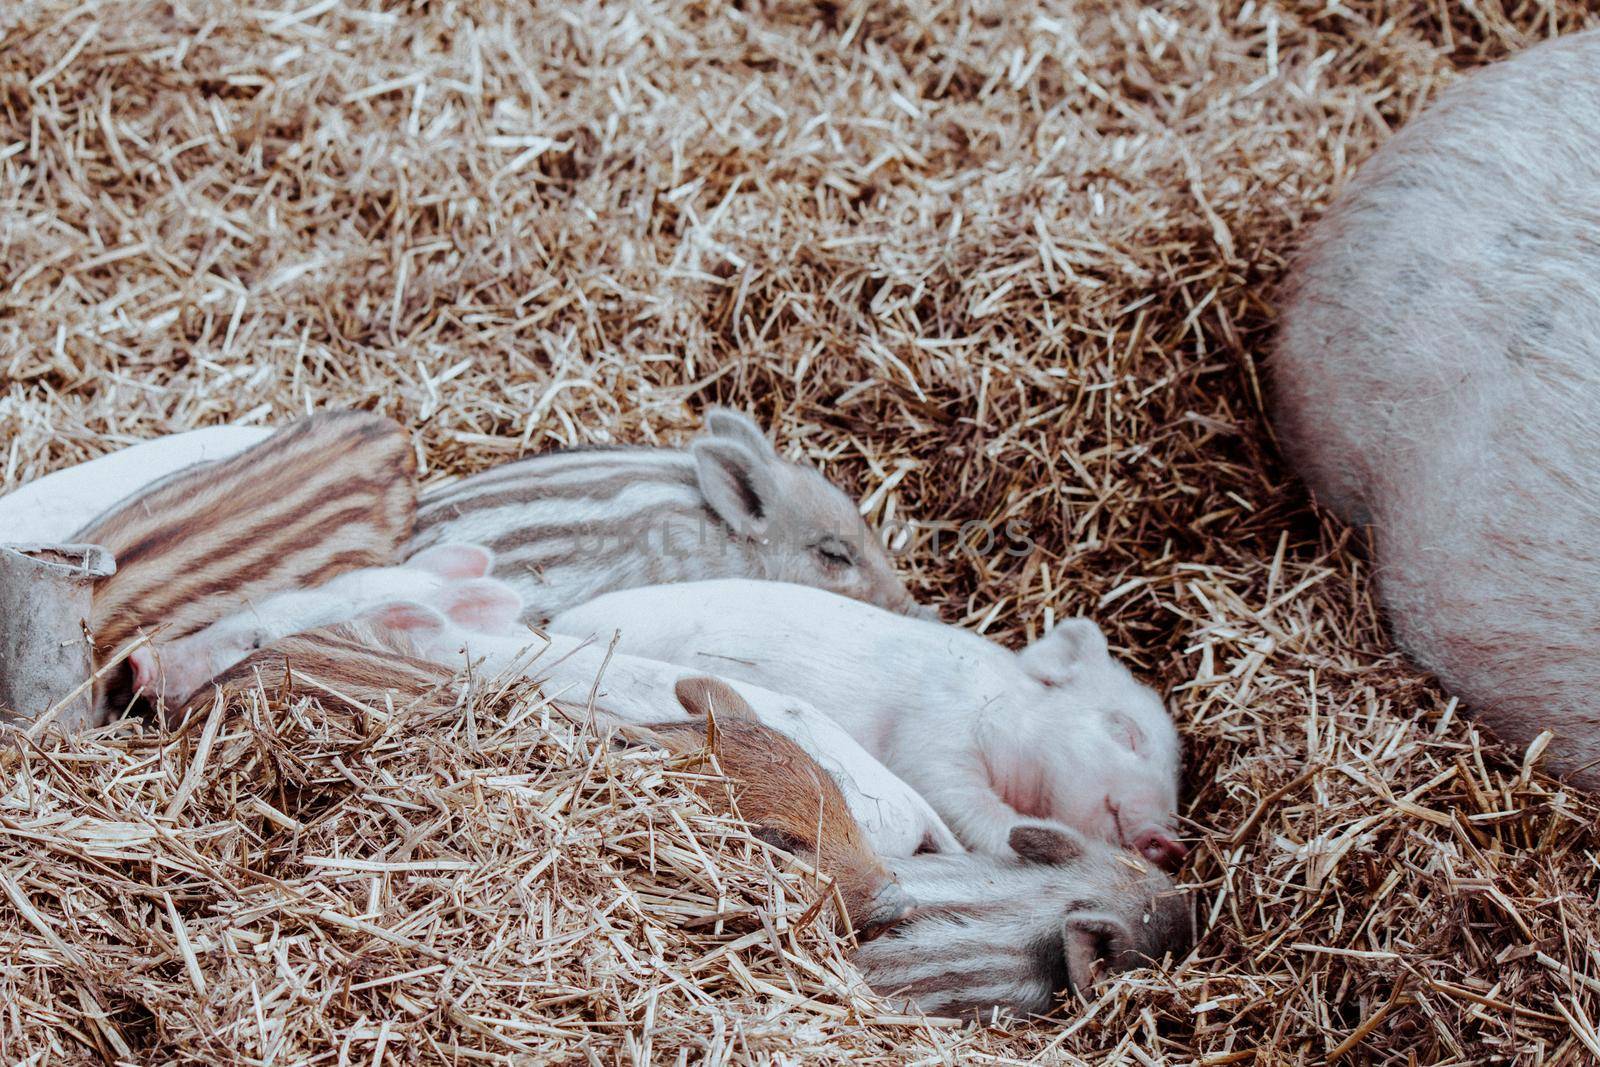 Little pink pigs lie next to the hay. High quality photo